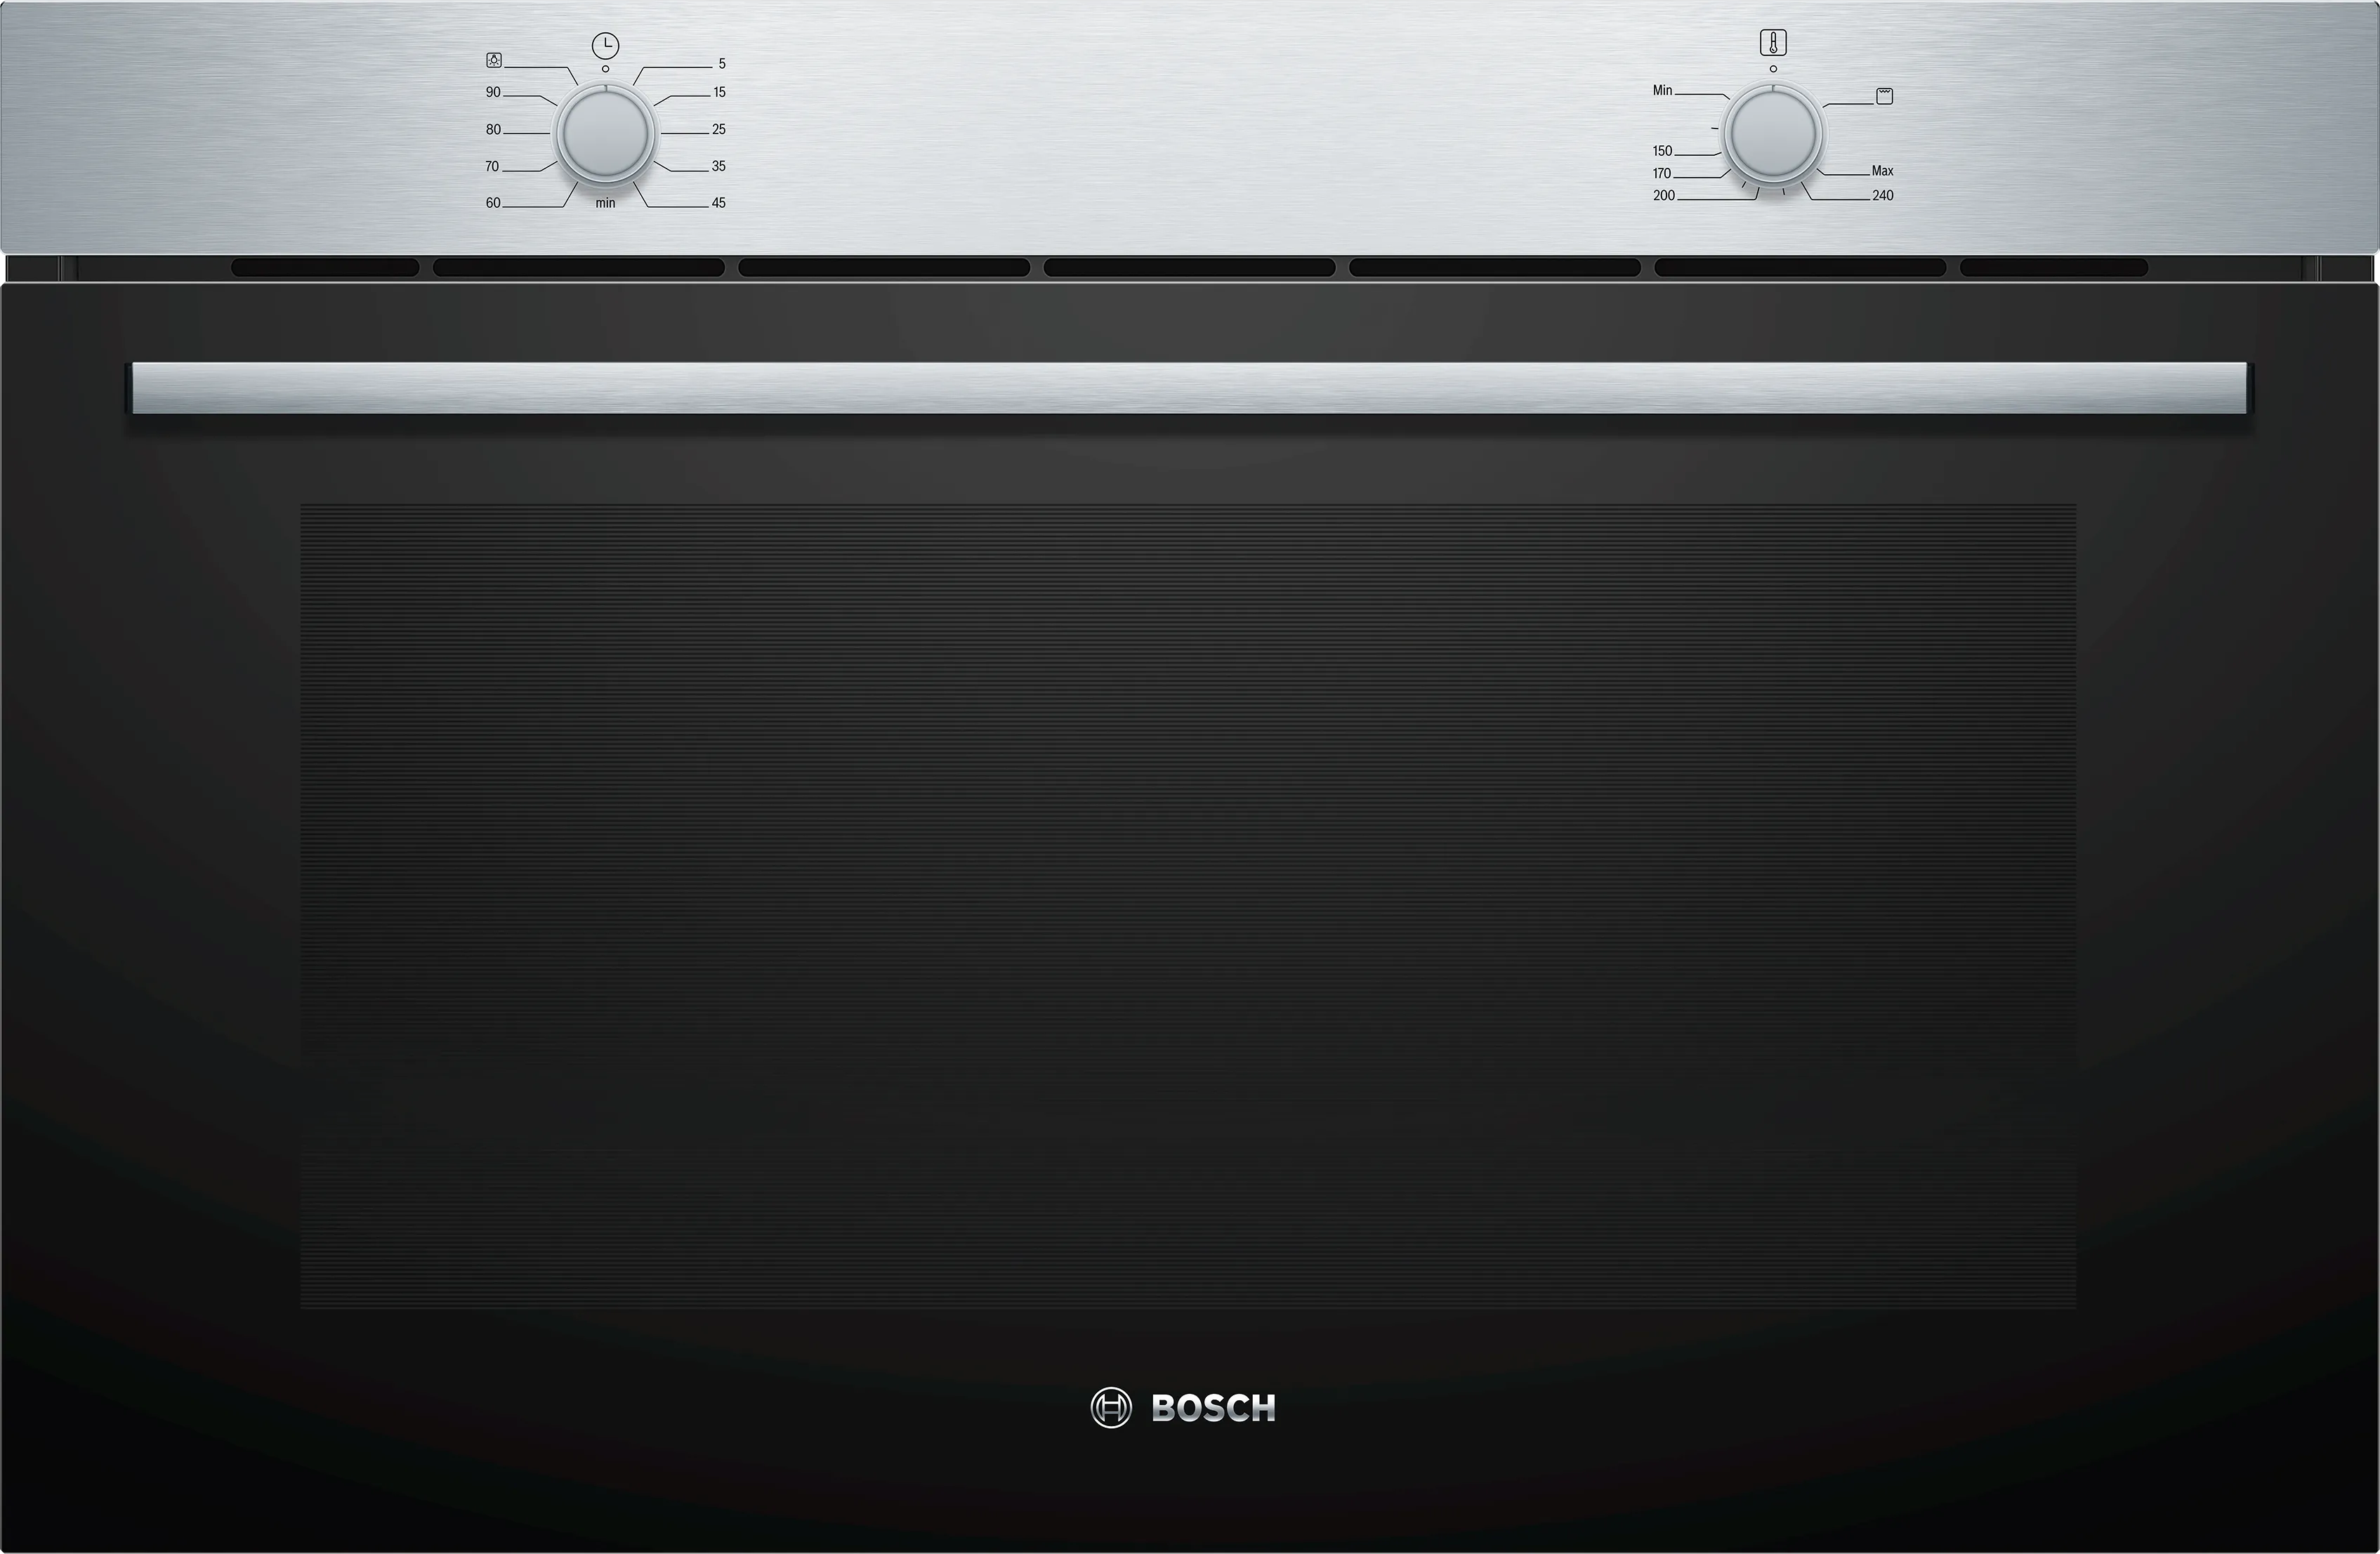 VGD011BR0M Gas built-in oven